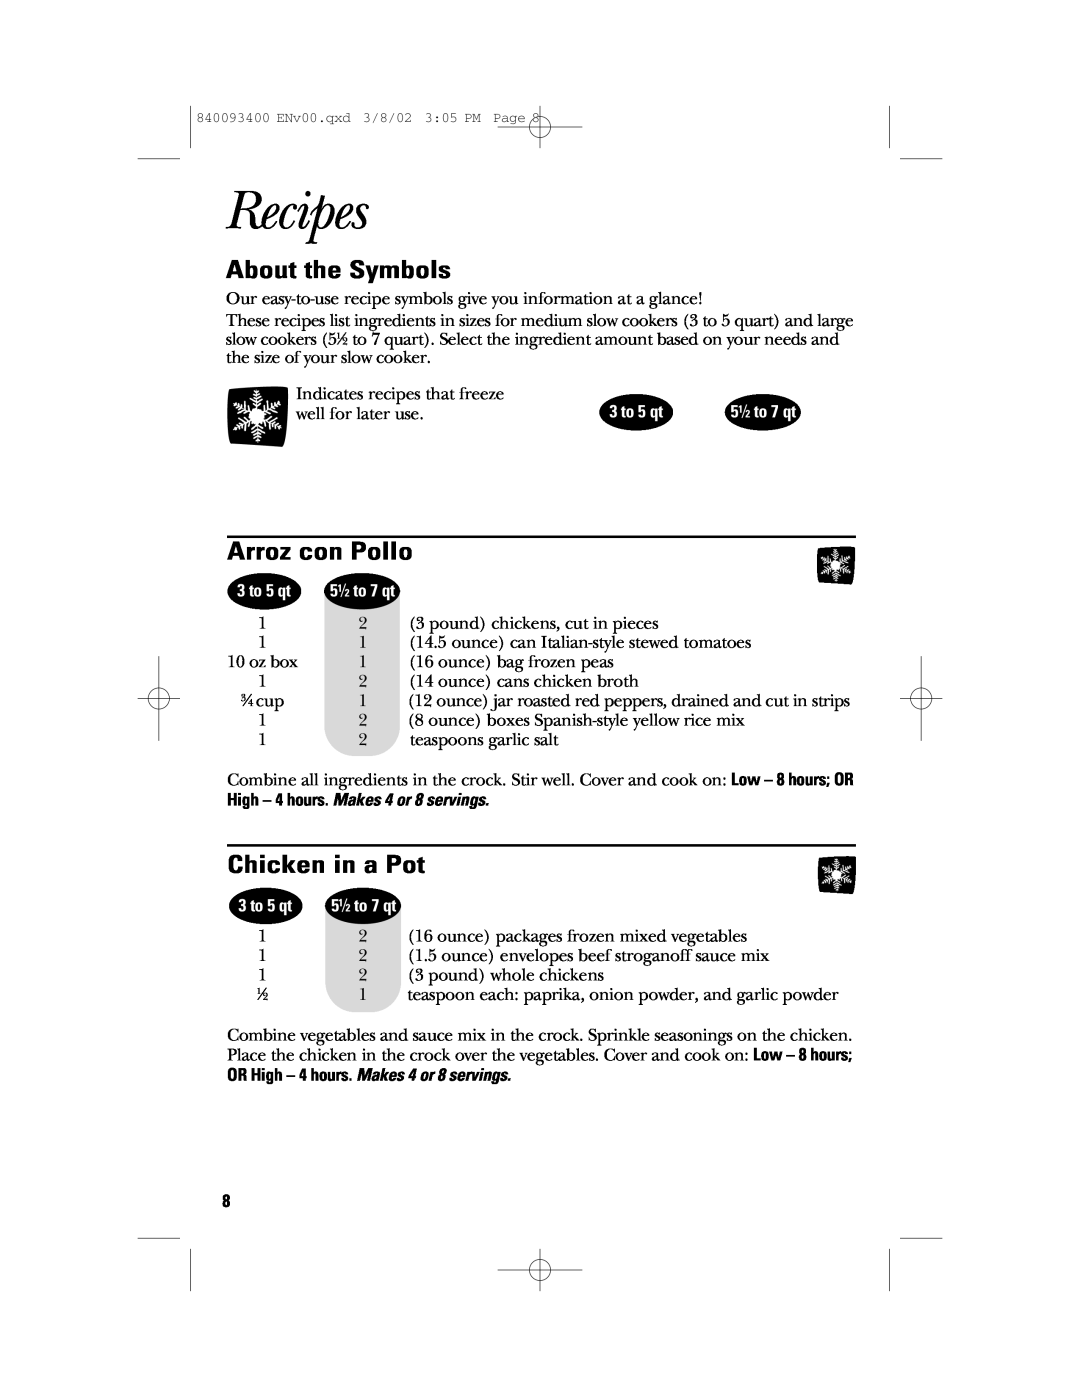 GE 106724 manual Recipes, About the Symbols, Arroz con Pollo, Chicken in a Pot, Indicates recipes that freeze, 3 to 5 qt 